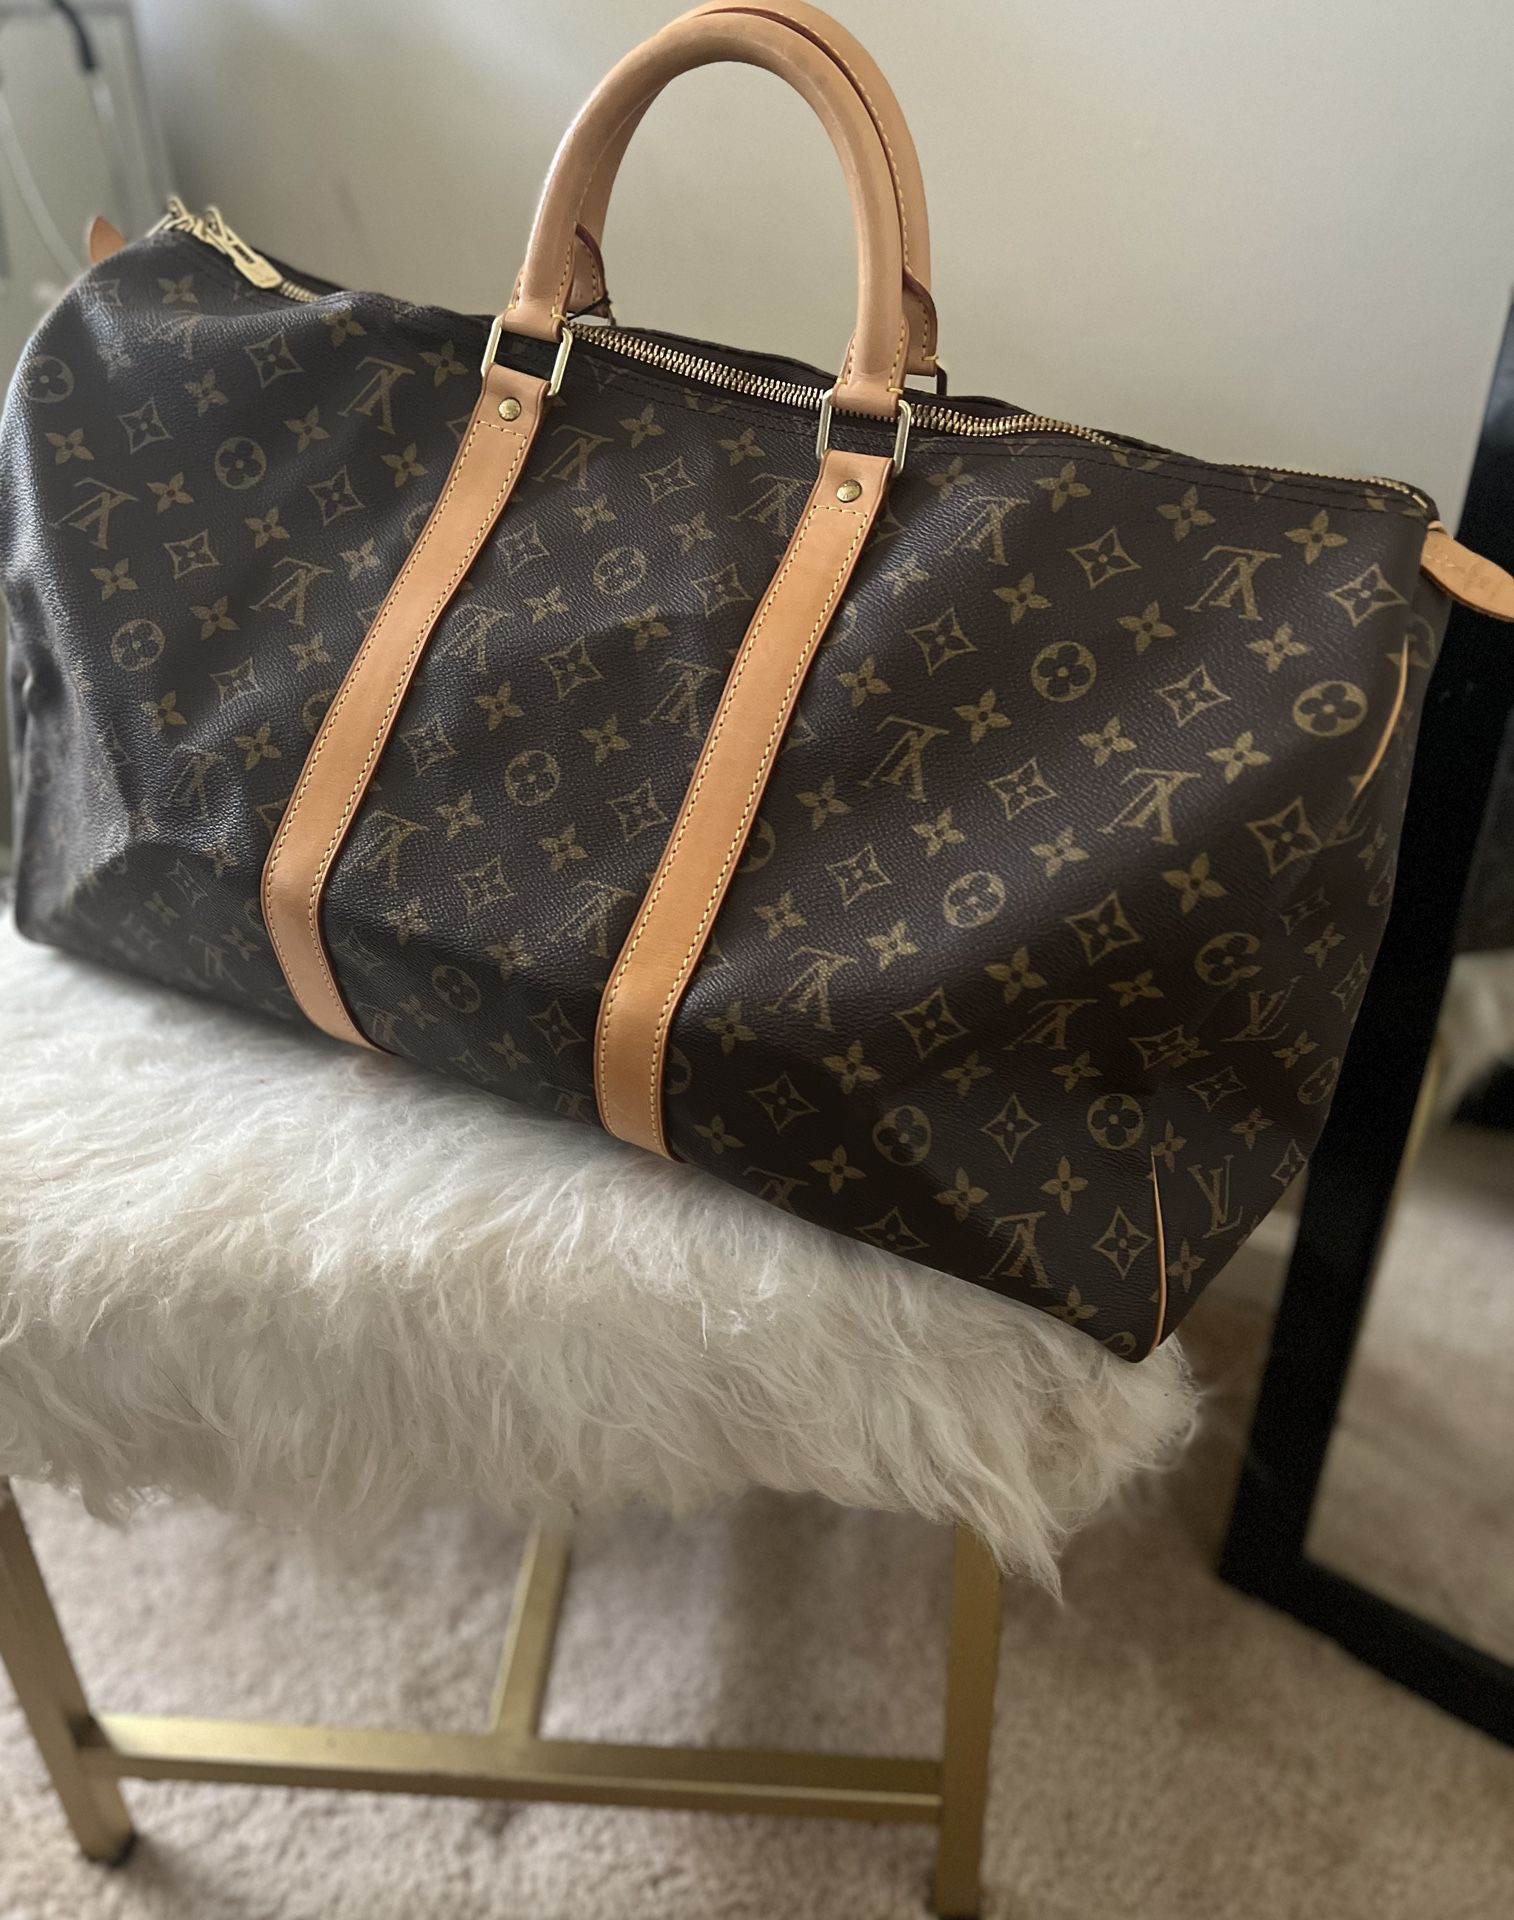 Authentic Louis Vuitton Duffle Bag for Sale in Stone Mountain, GA - OfferUp